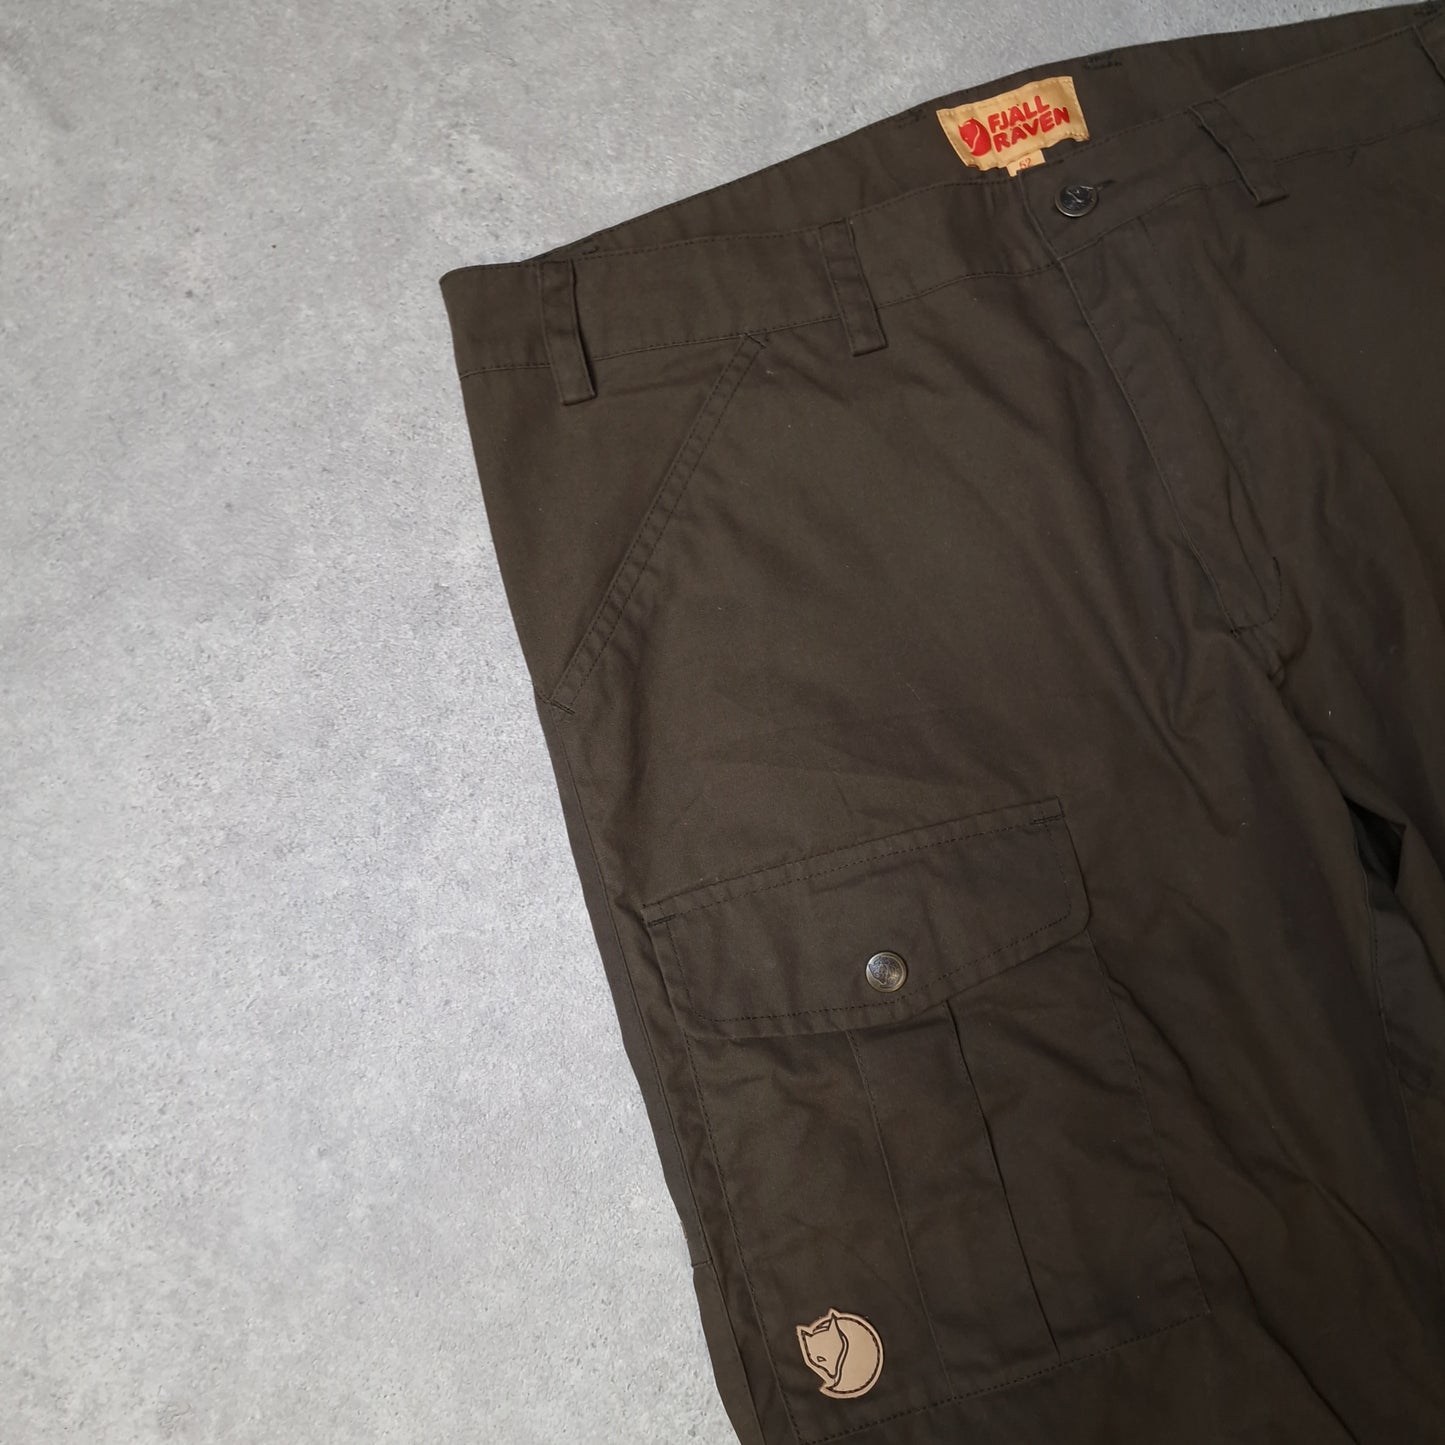 Fjallraven G-100 trousers in brown - 36"